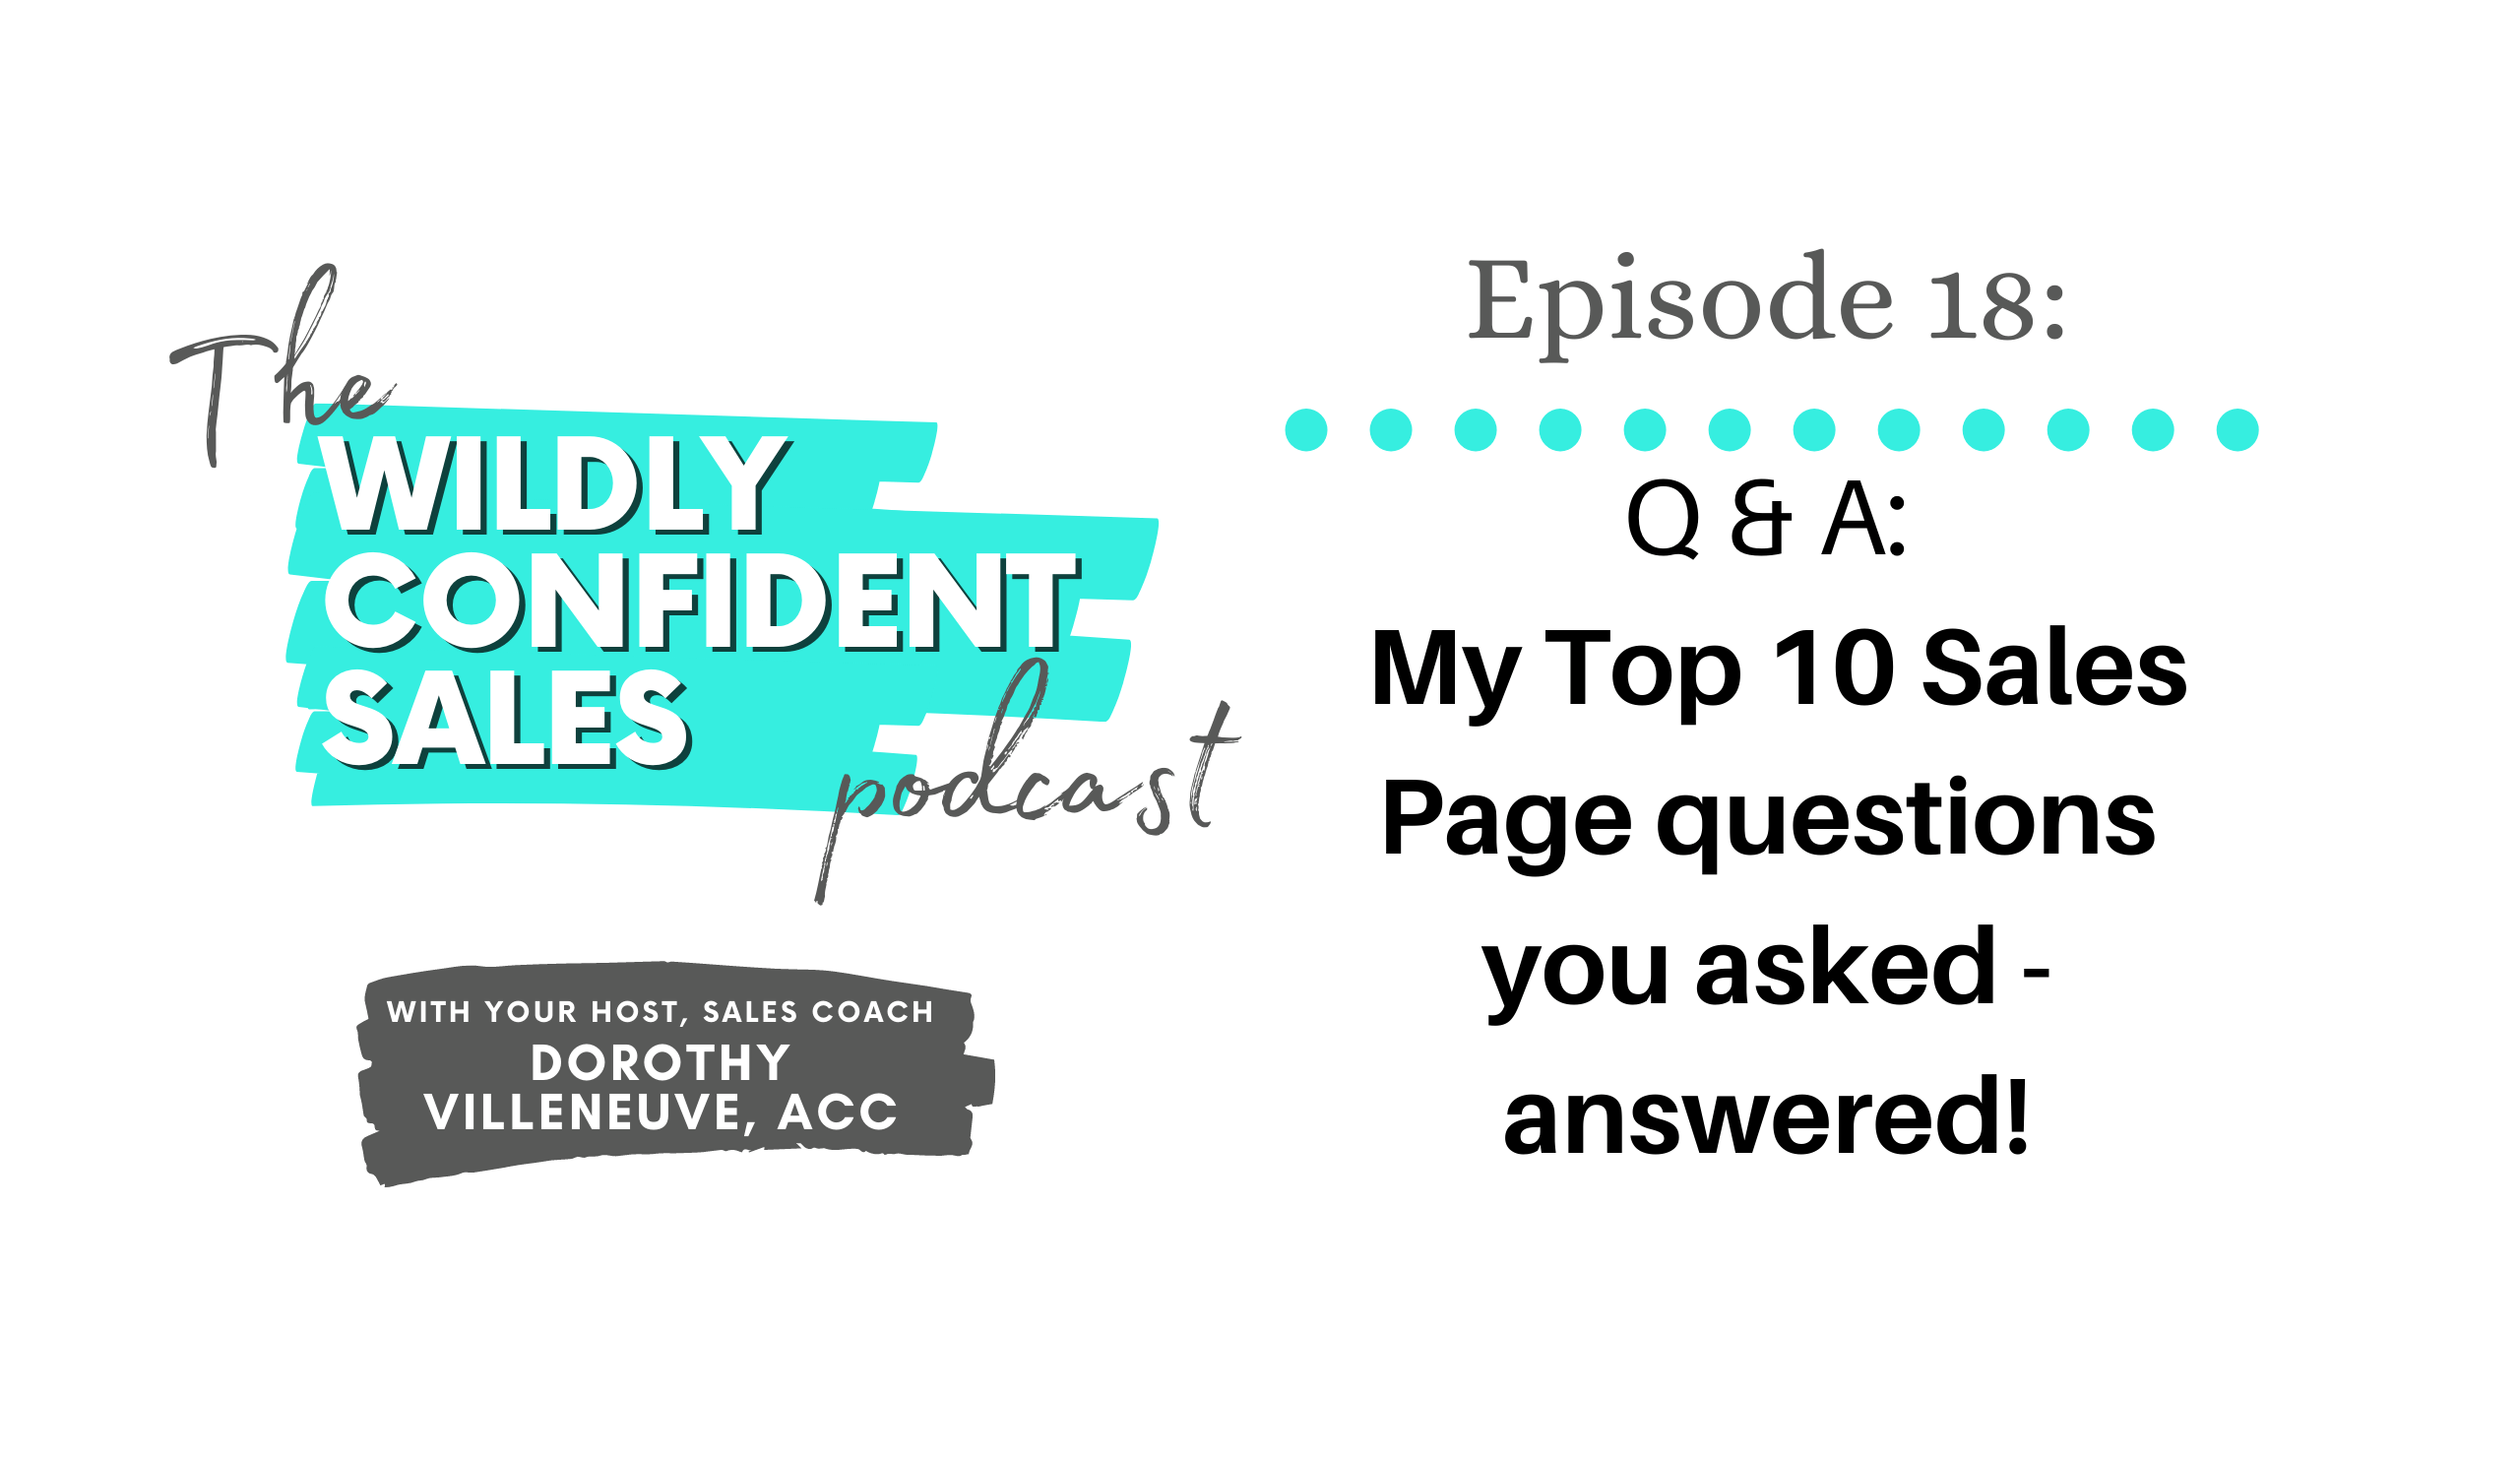 Q & A My Top 10 Sales Page Questions You Asked - Answered!